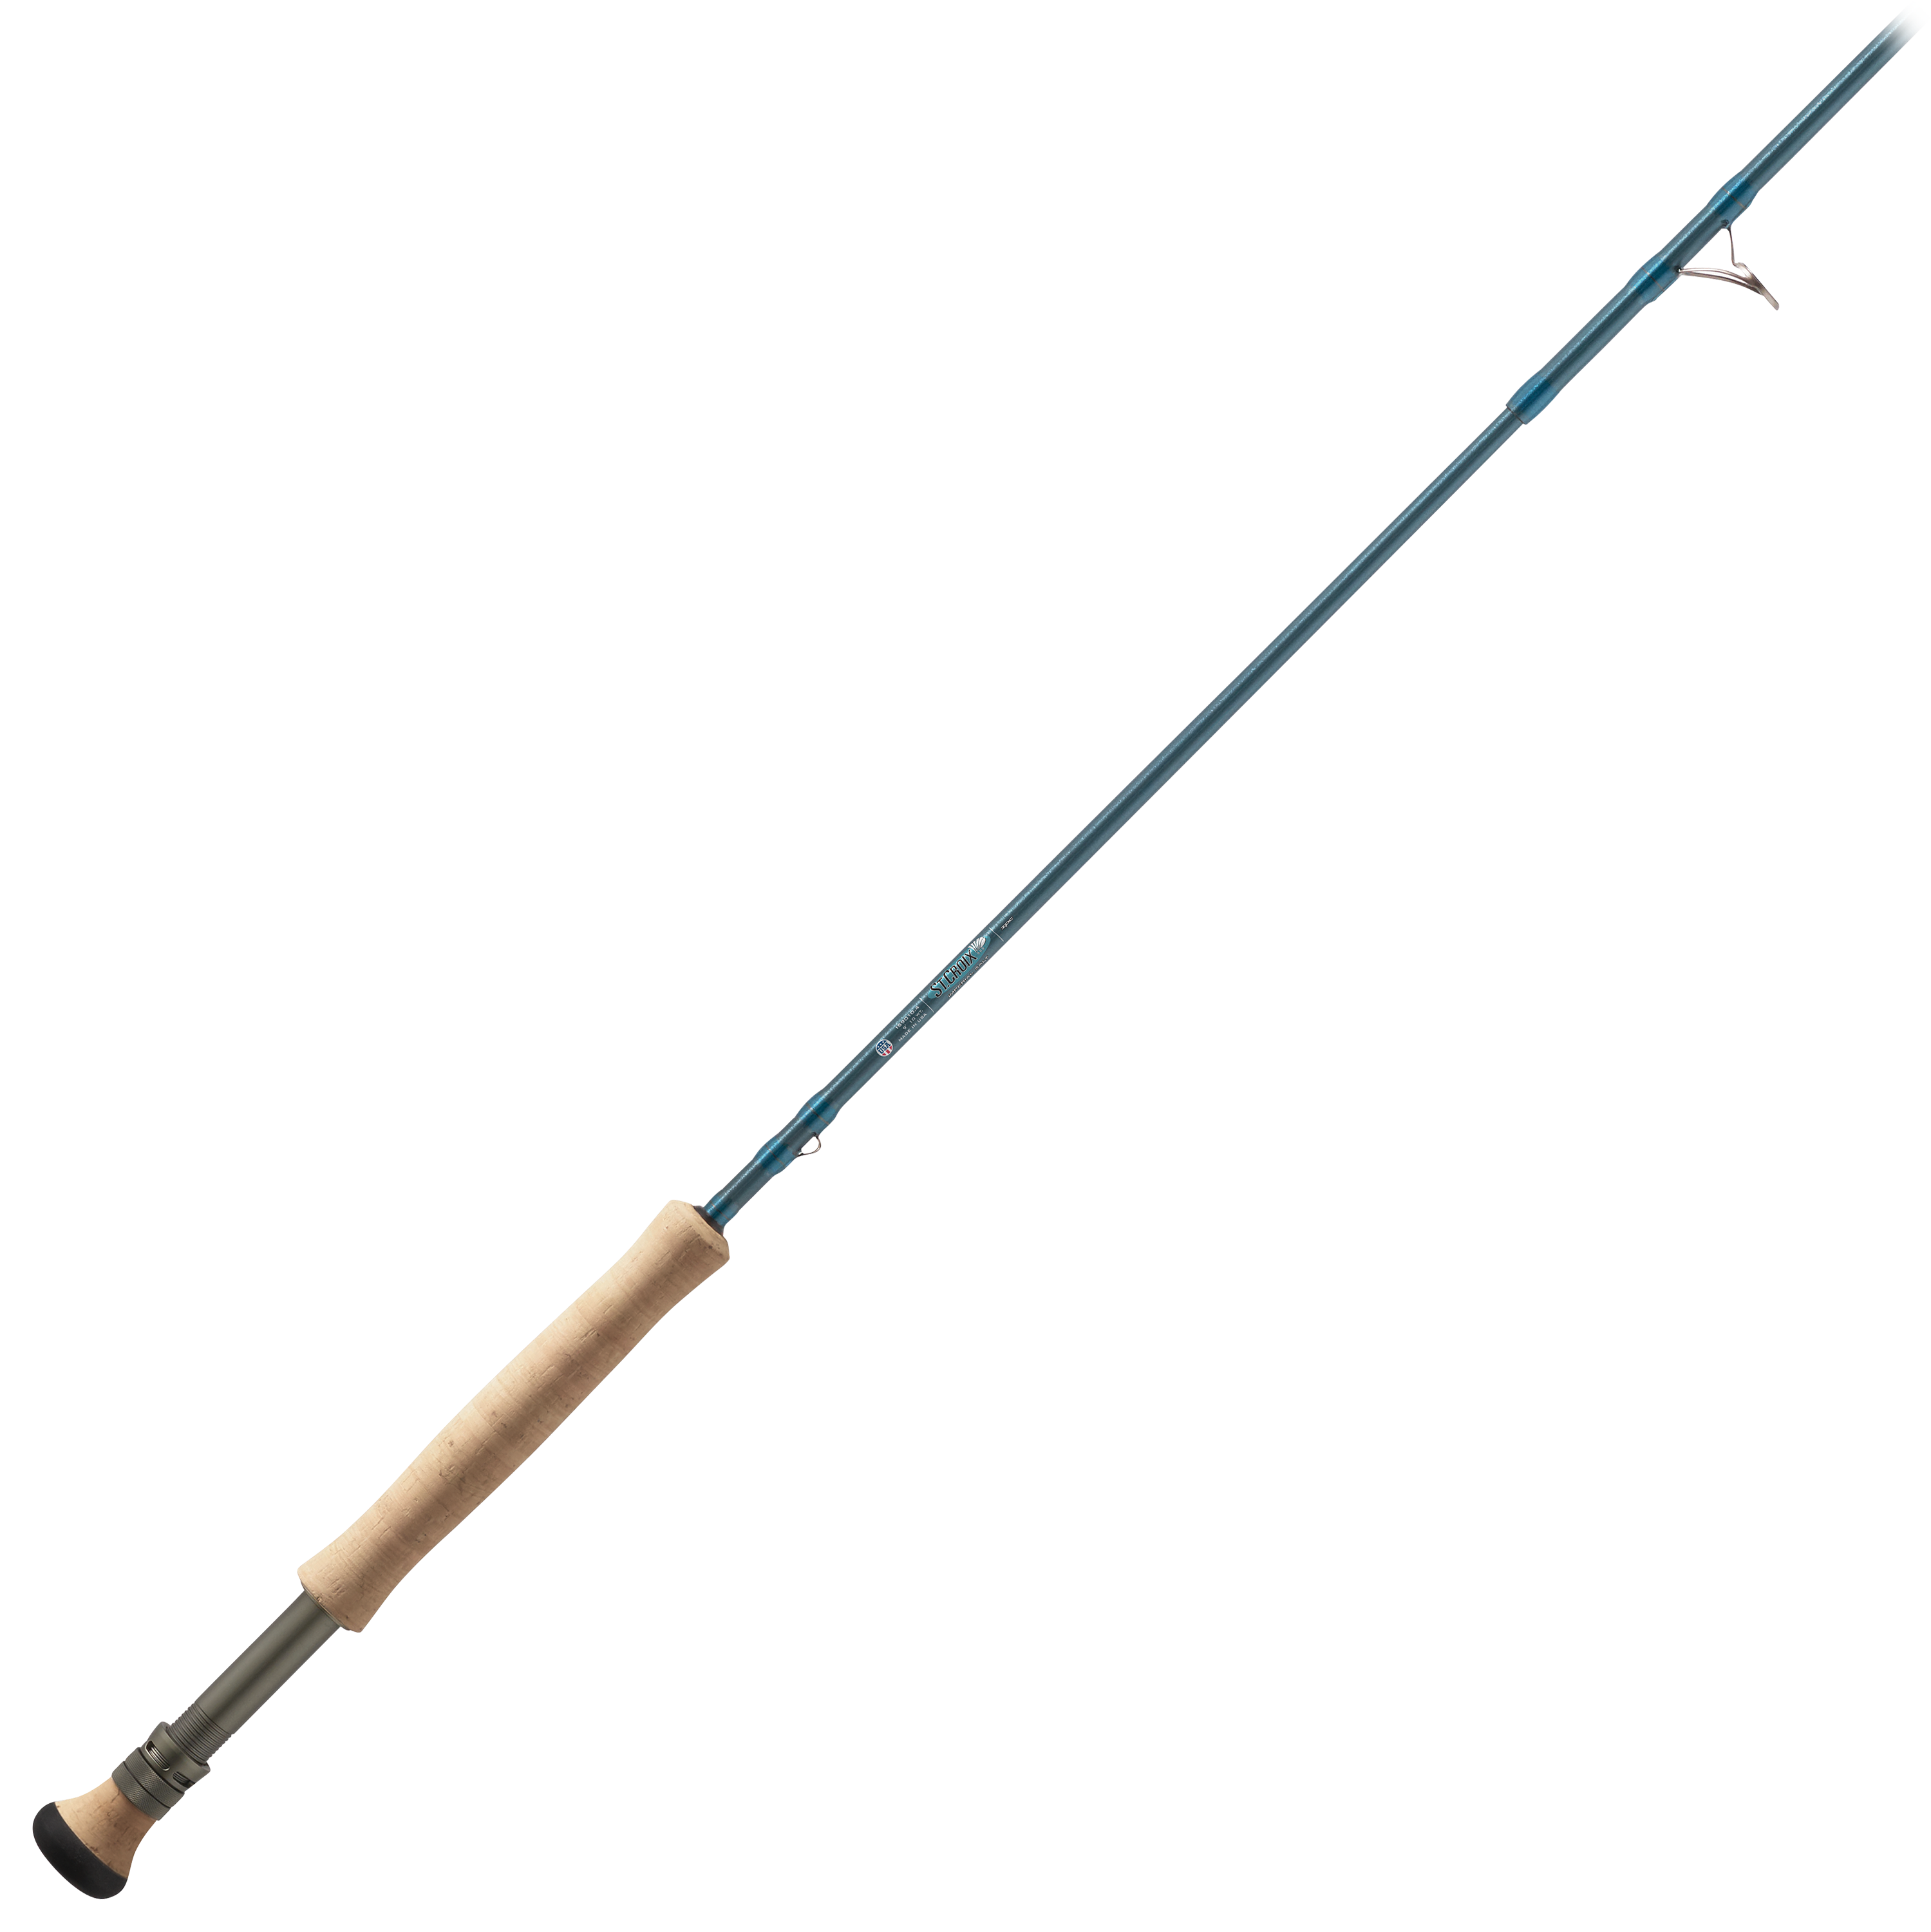 St. Croix Imperial Salt Fly Rod - IS907.4